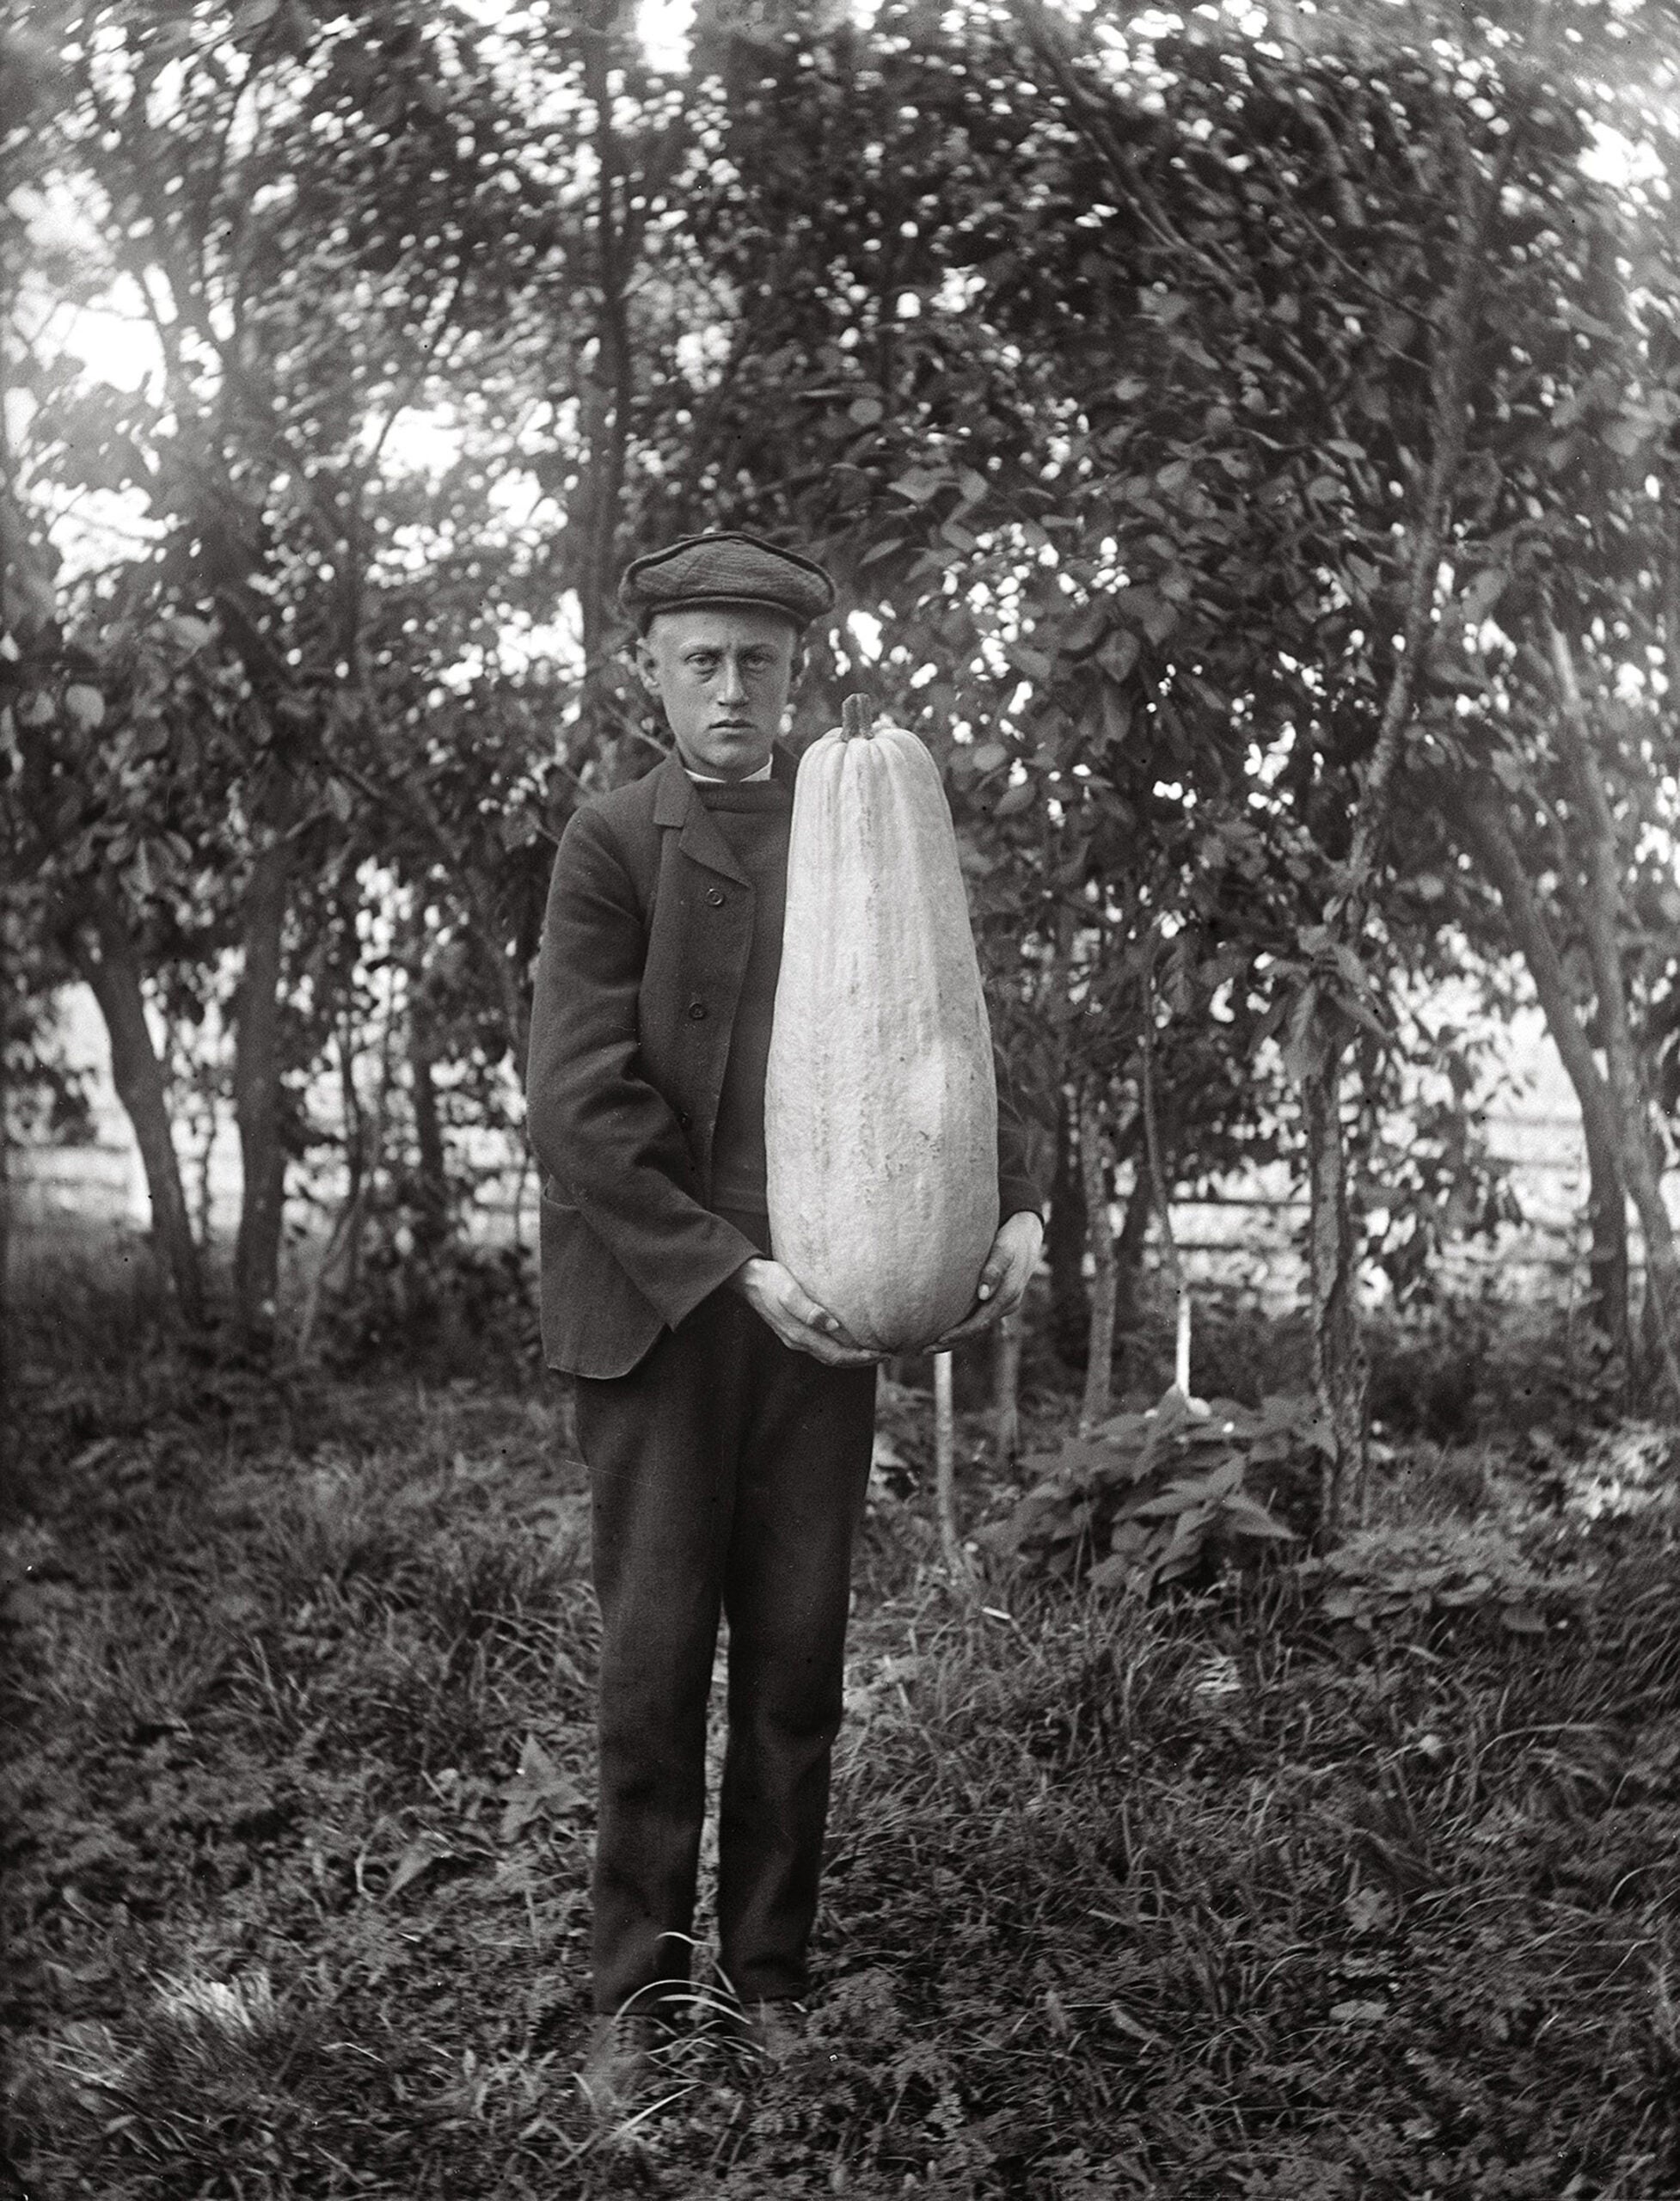 A B&W image of a man with a very large gourd. 